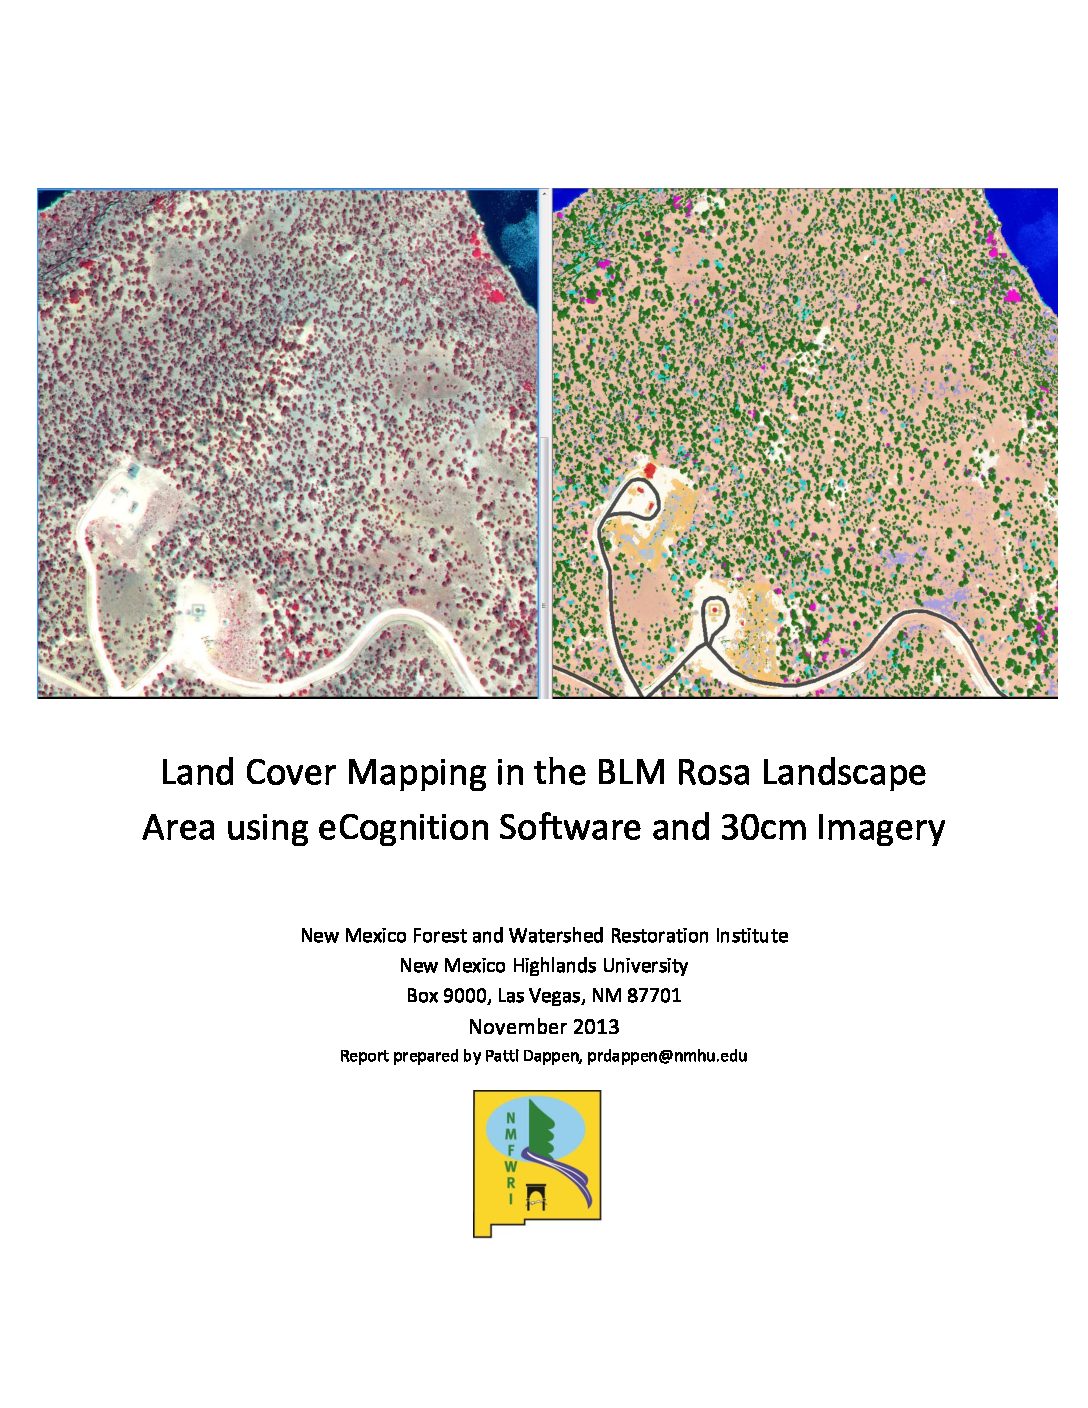 Land Cover Mapping in the BLM Rosa Landscape Area using eCognition Software and 30cm Imagery